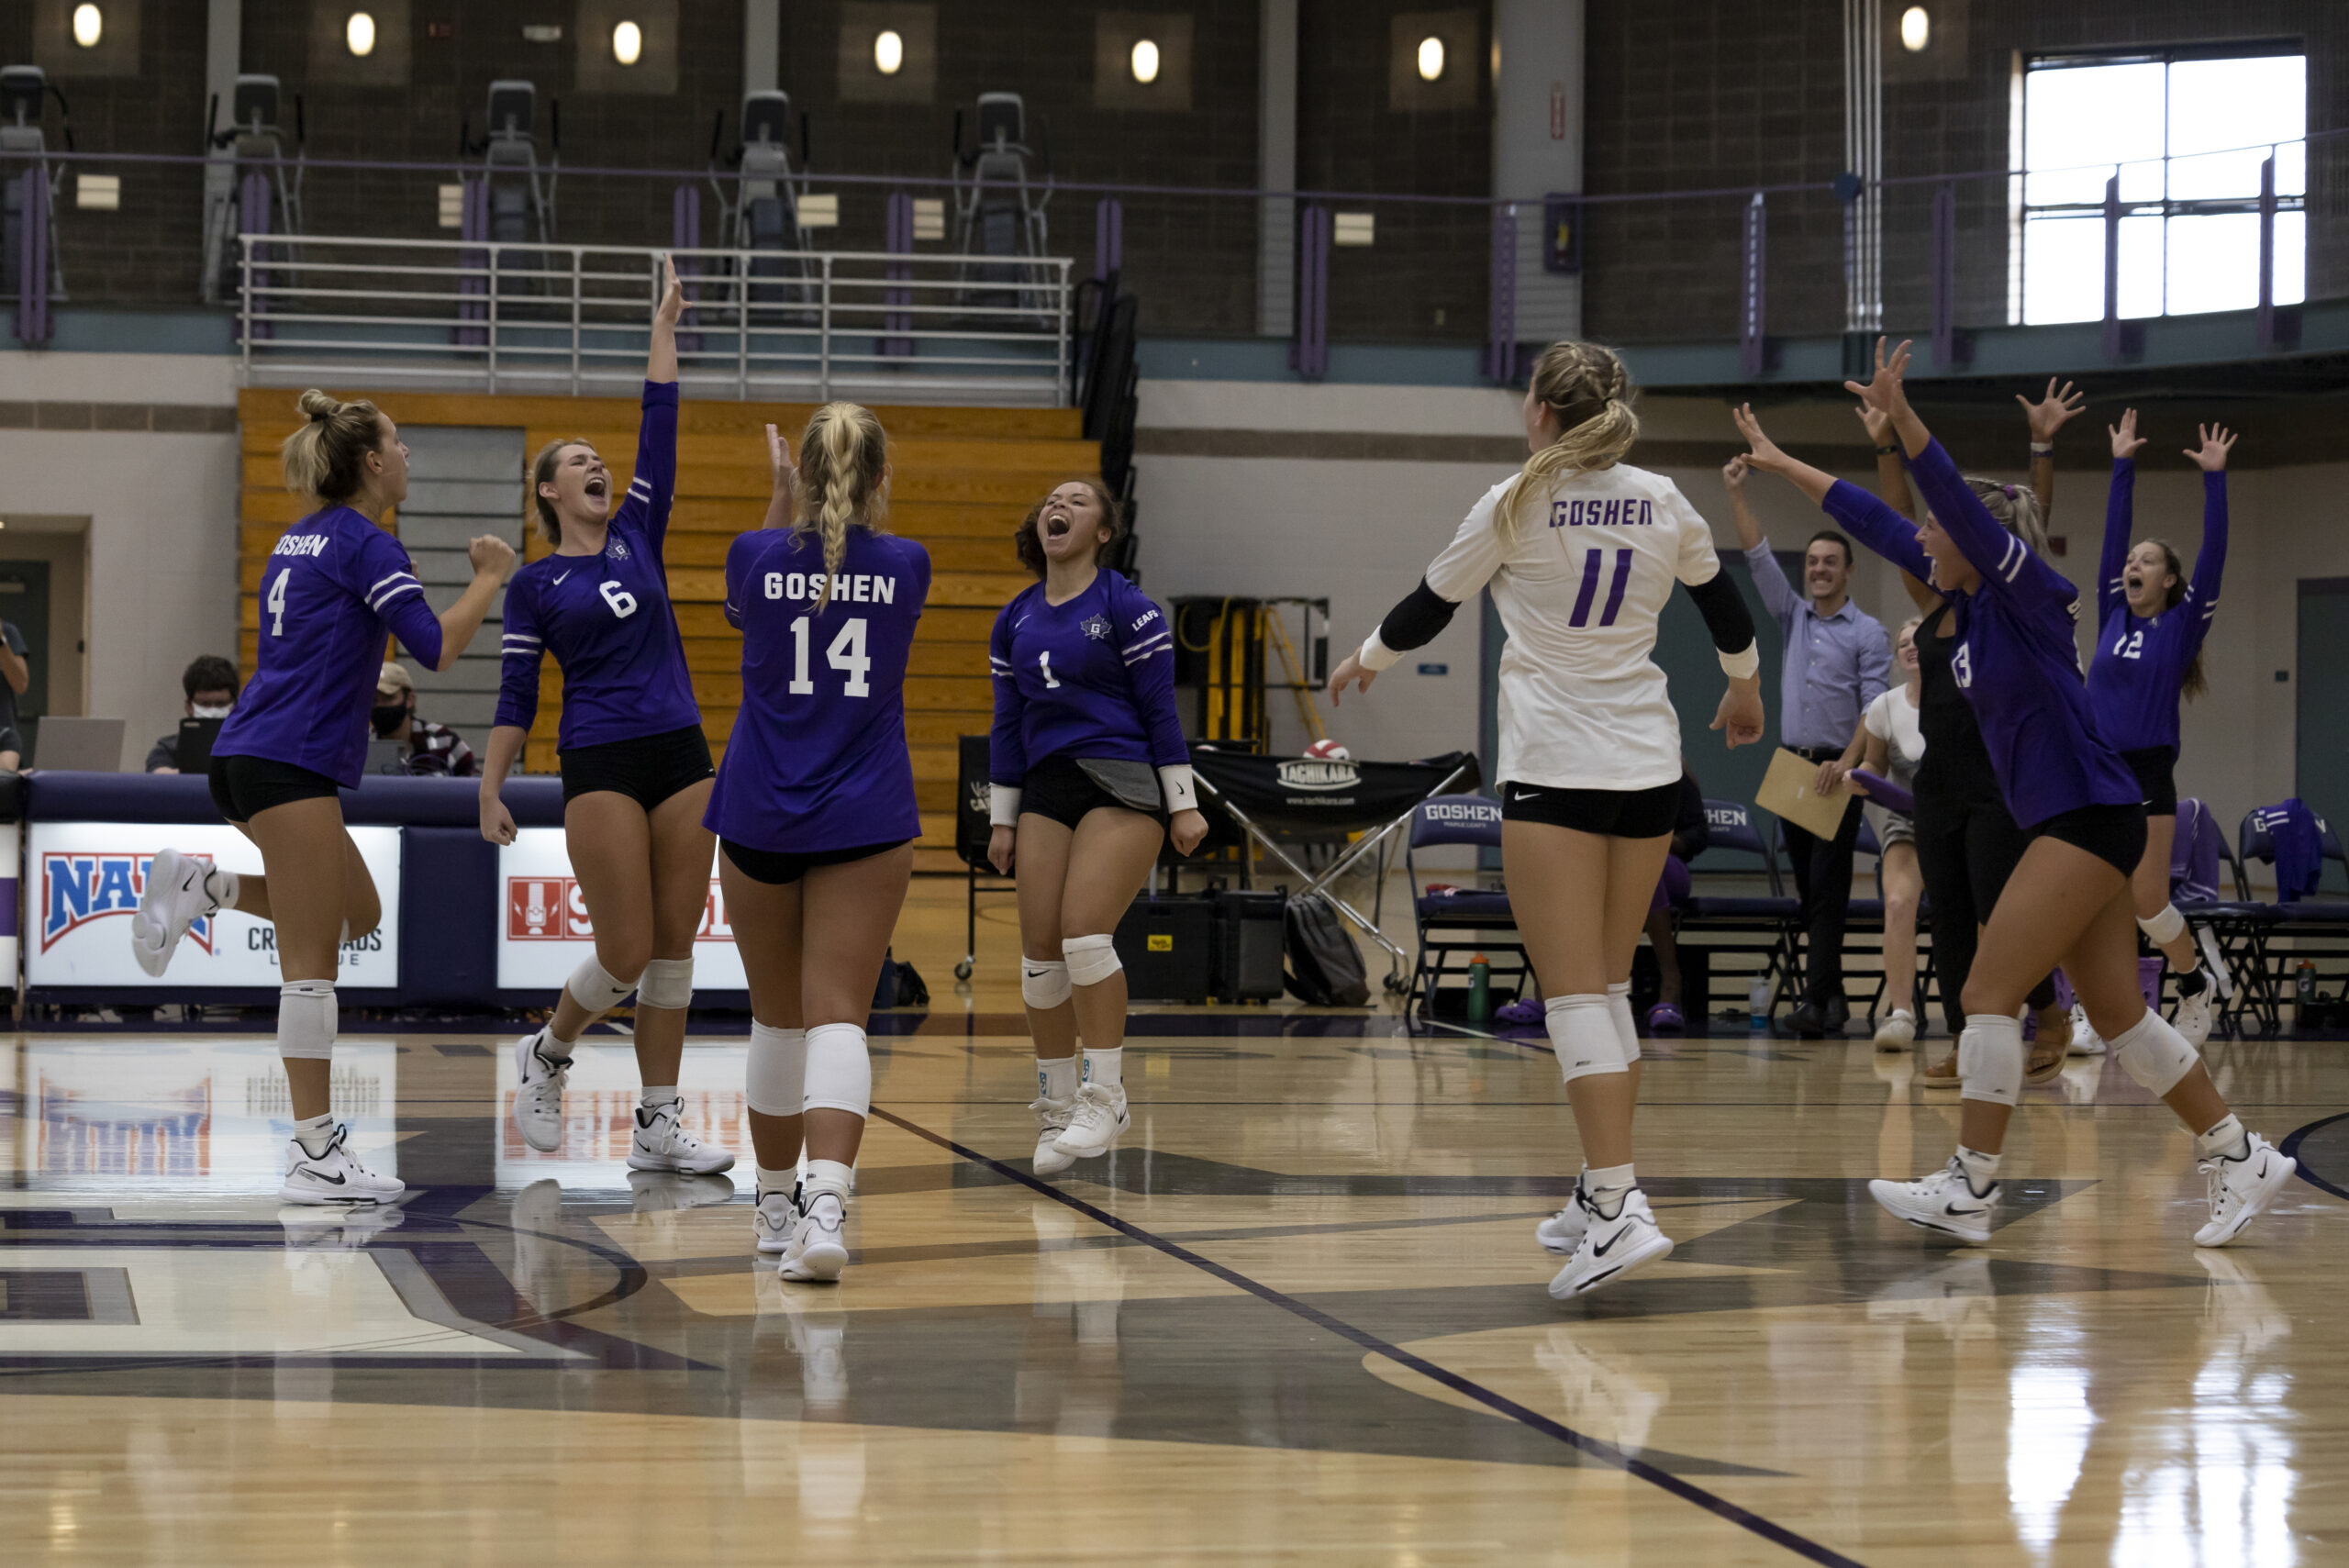 Volleyball team celebrates a point